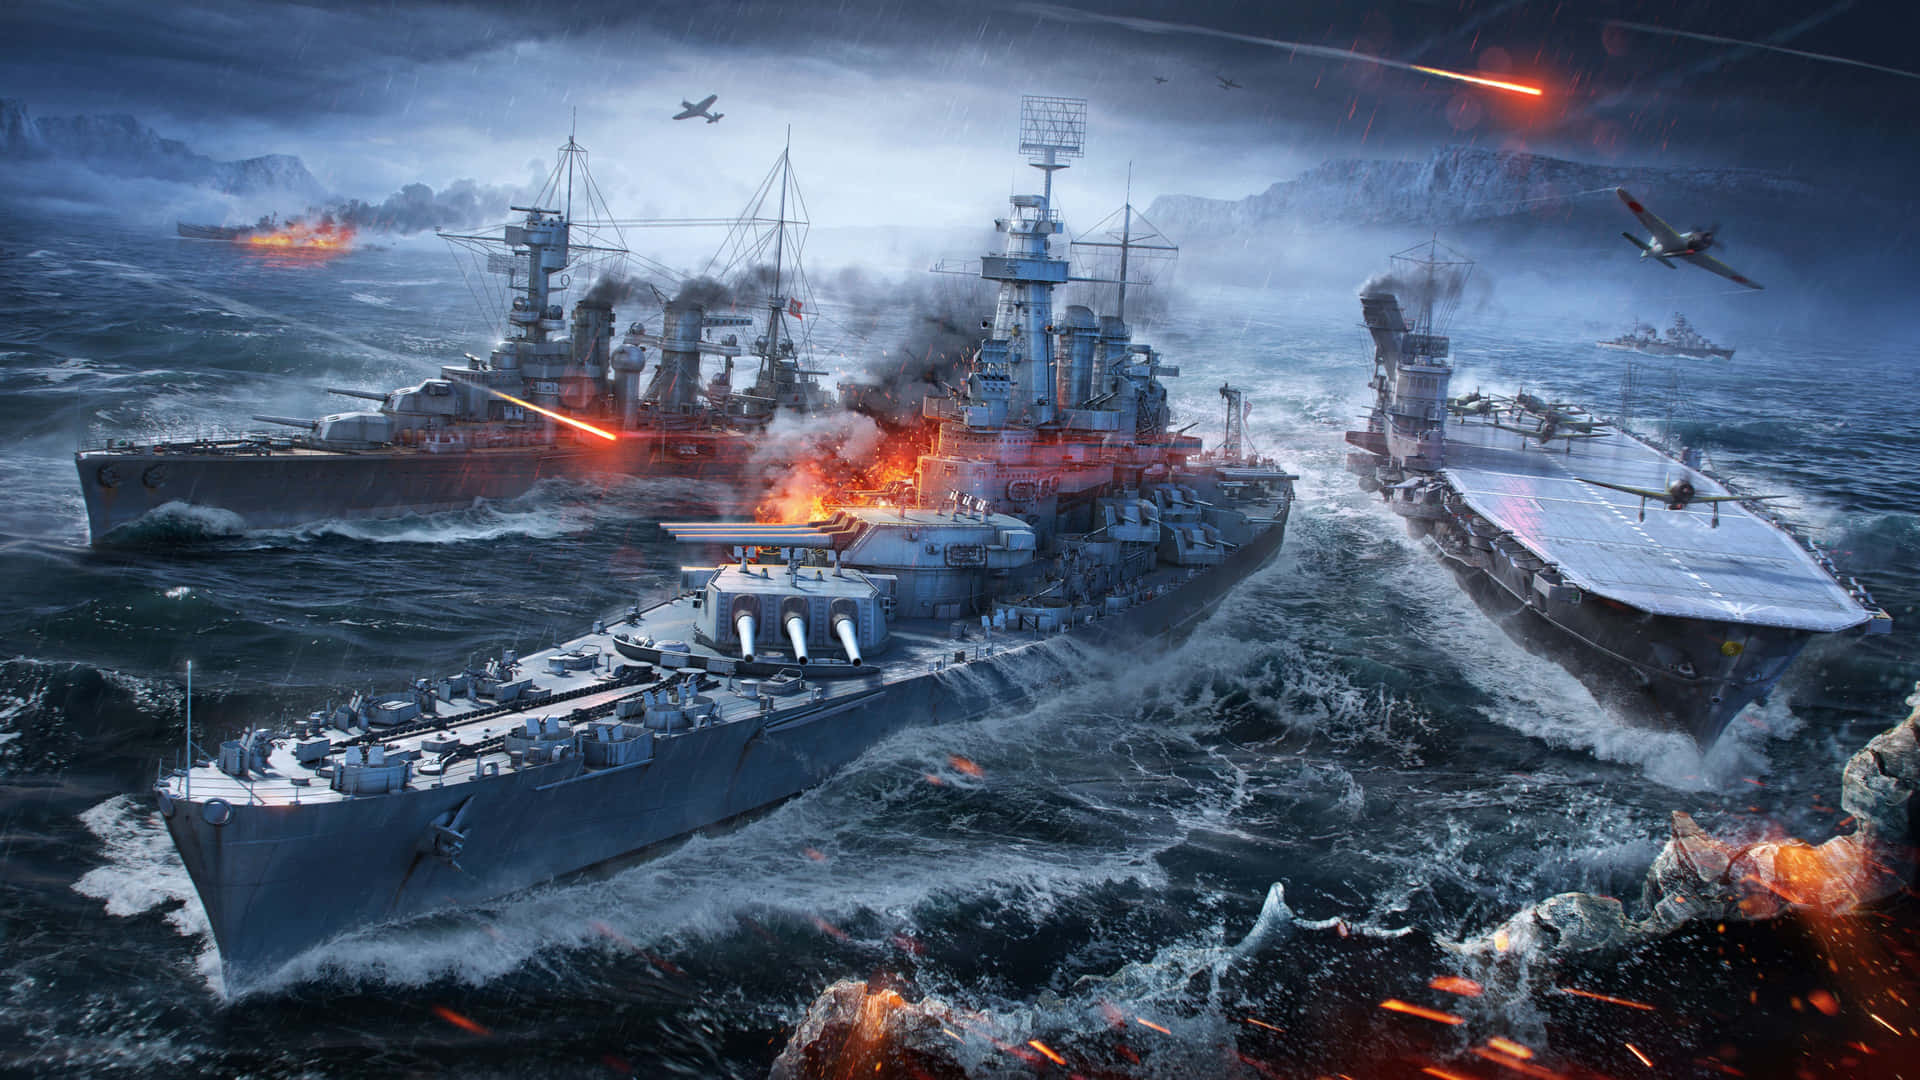 Two gigantic battleships, mighty and inviolate, sail the vast ocean.